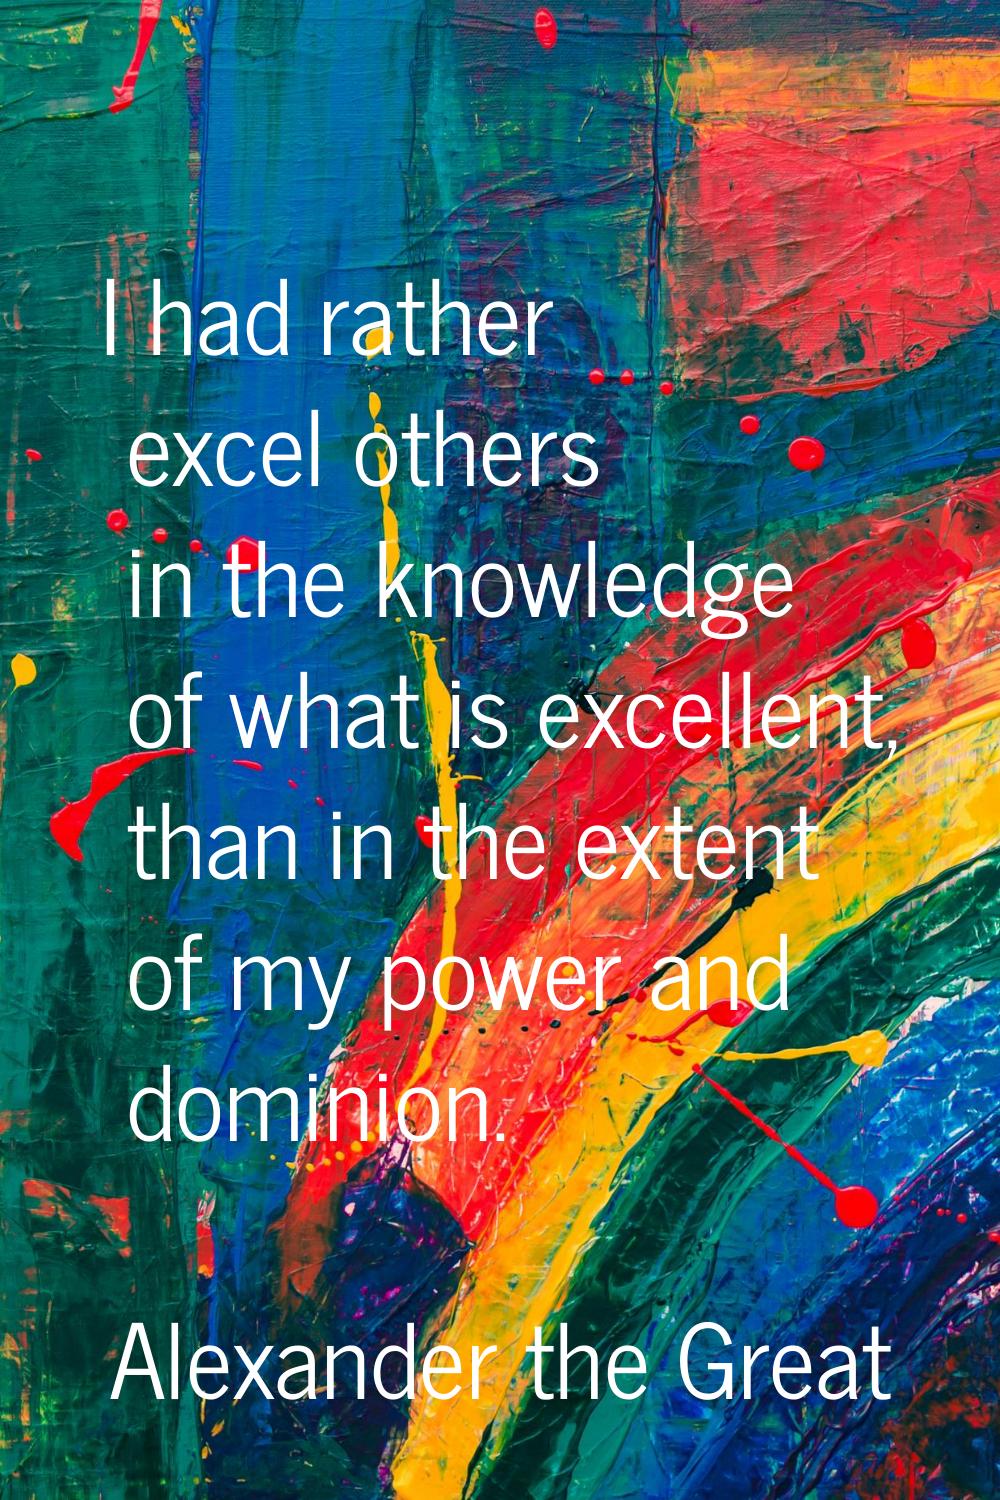 I had rather excel others in the knowledge of what is excellent, than in the extent of my power and